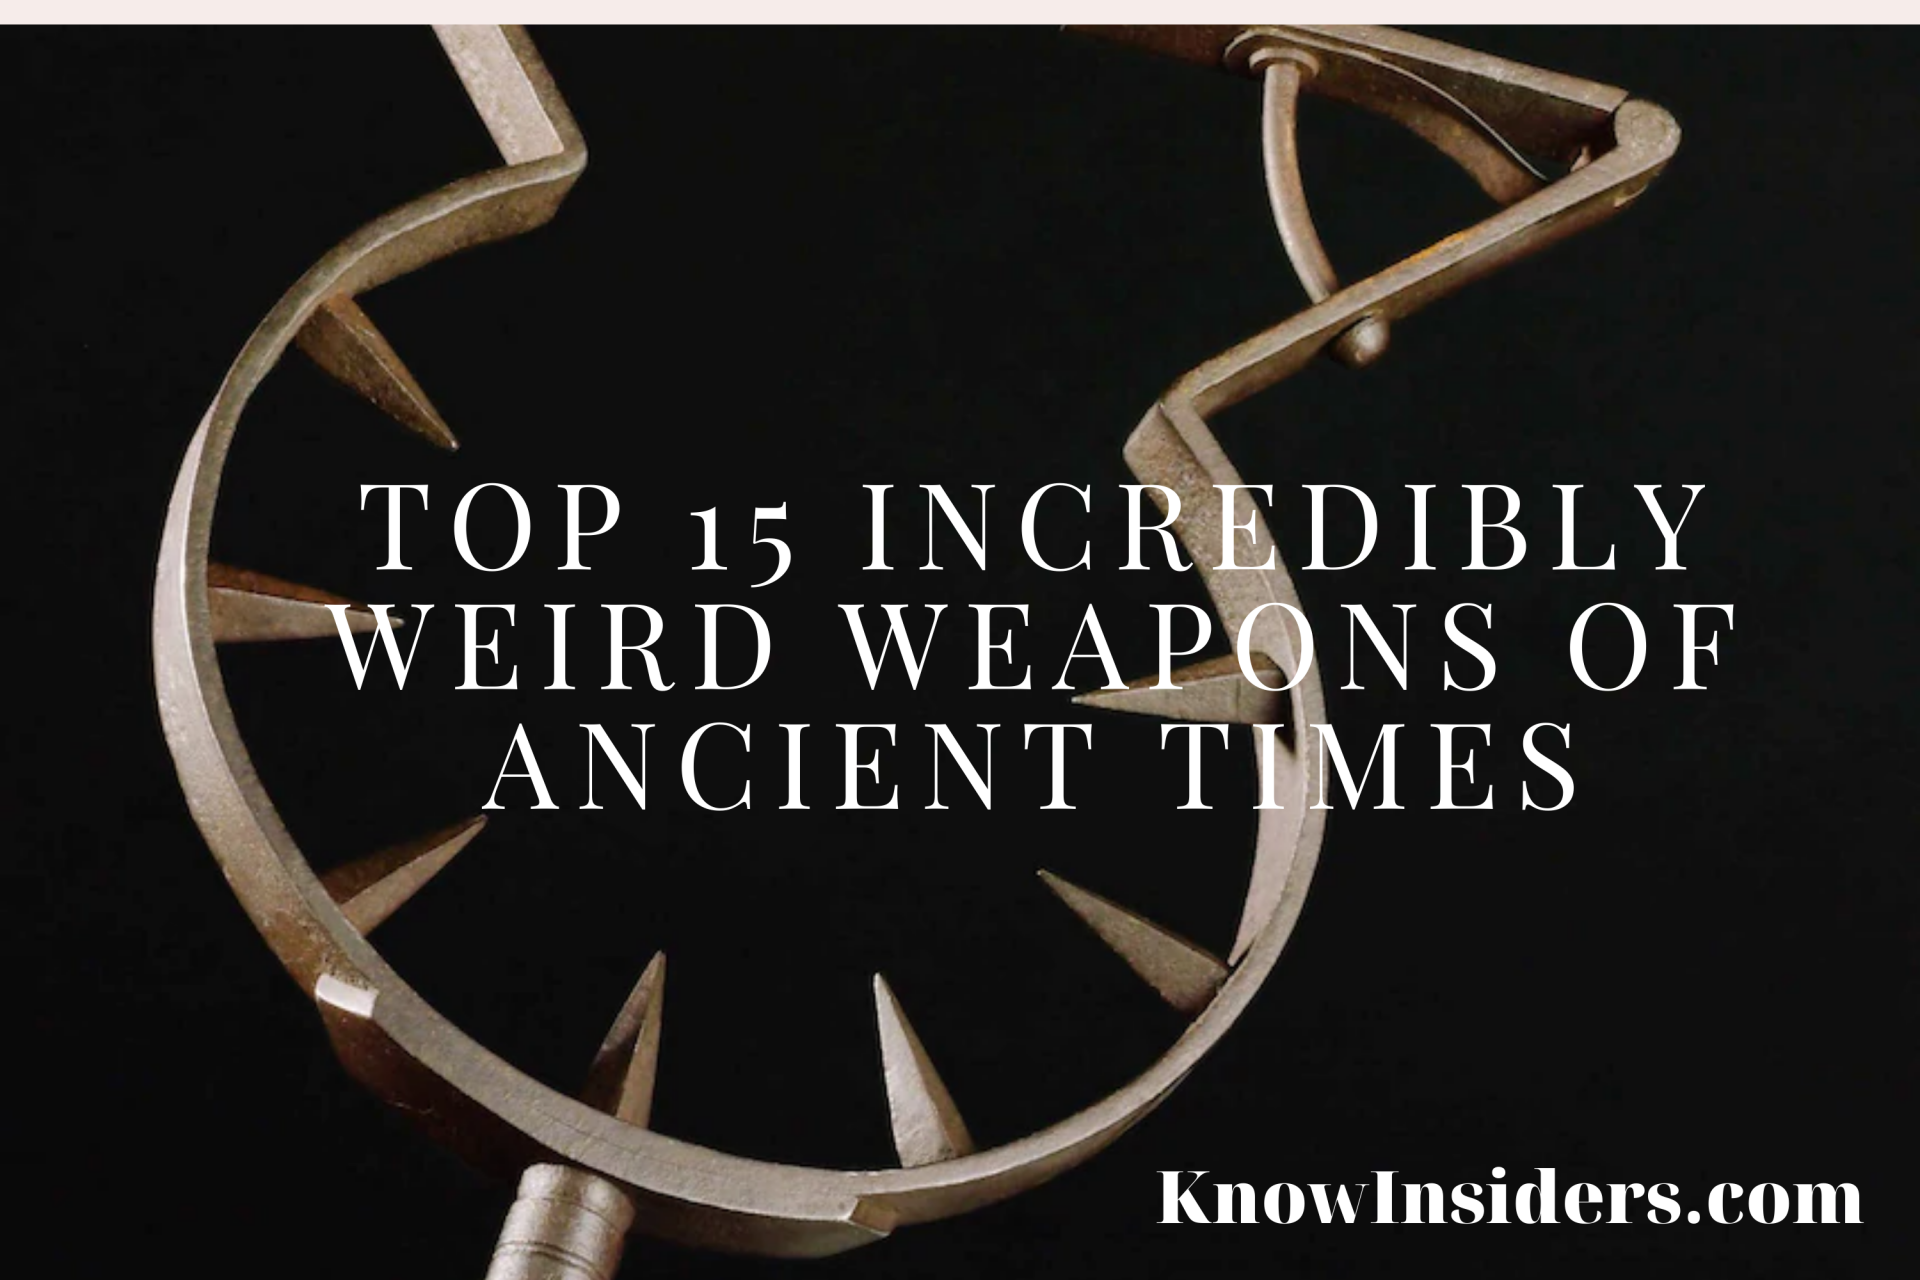 Top 15 Incredibly Weird Weapons of Ancient Times